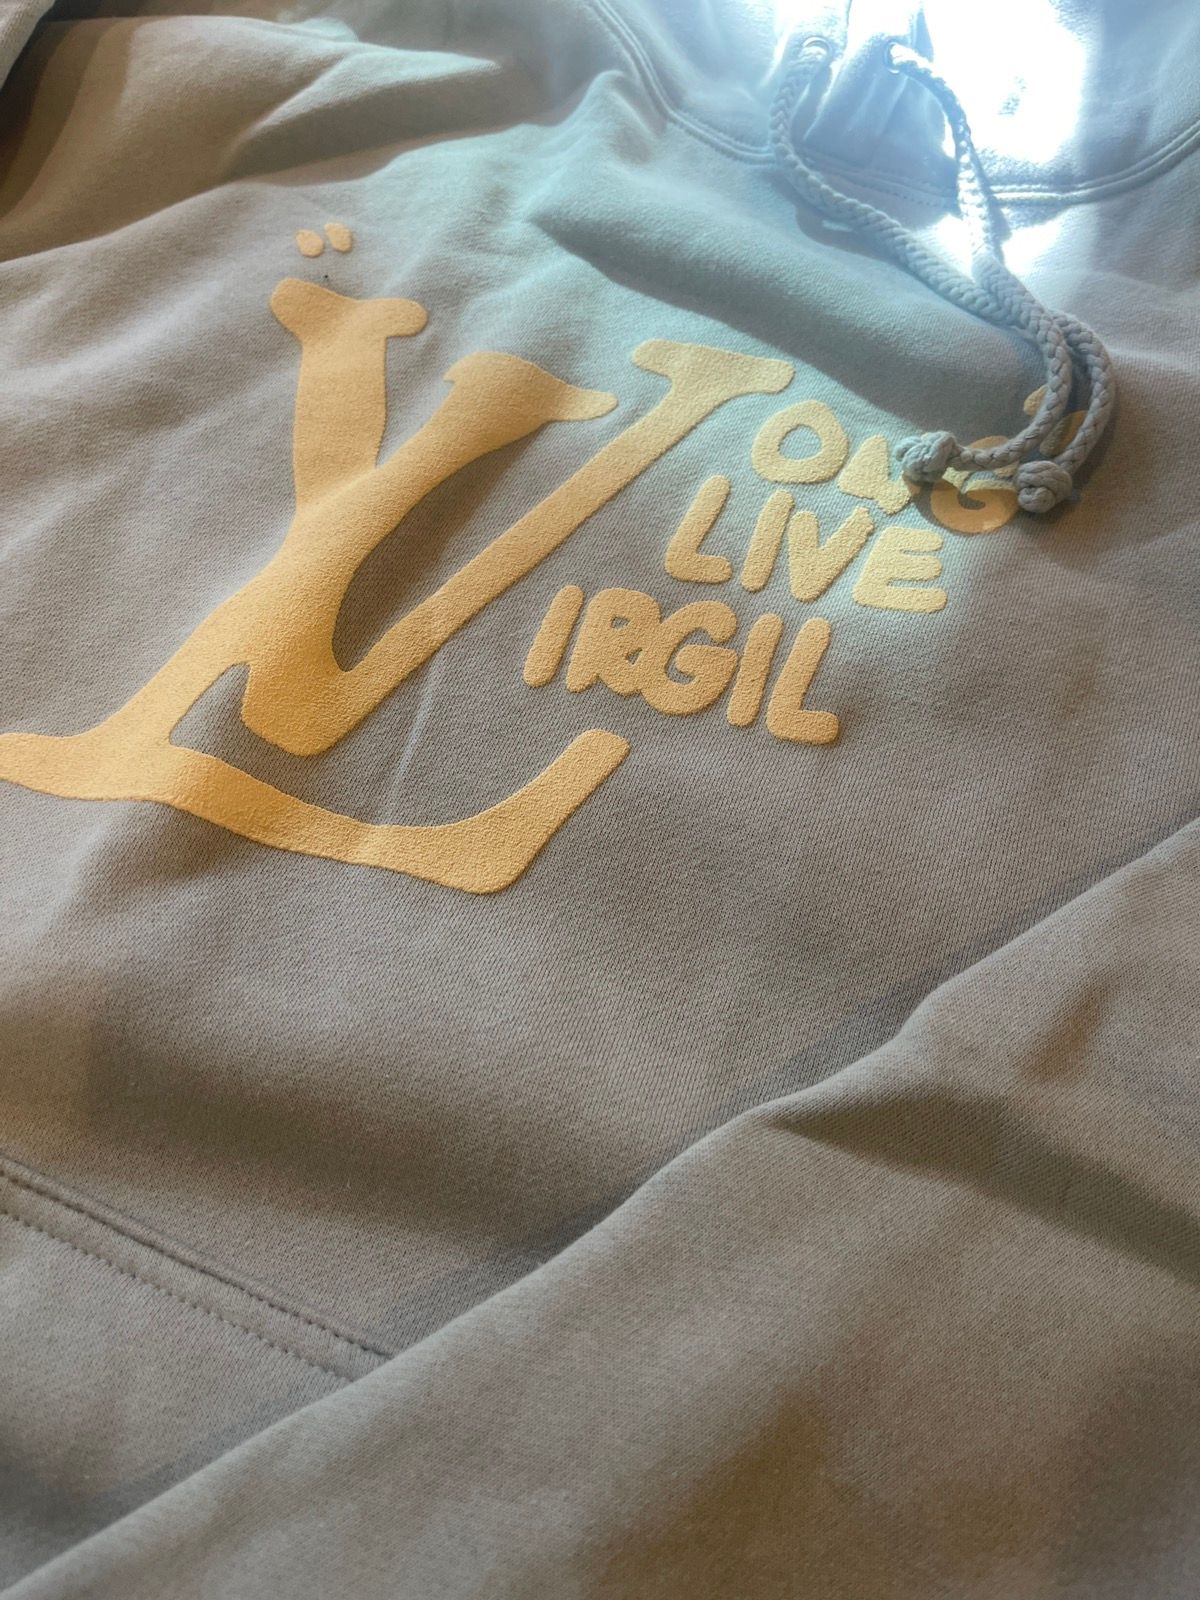 Long Live Virgil, Tops, Long Live Virgil Limited Pink Hoodie Size Large  Brand New Never Worn